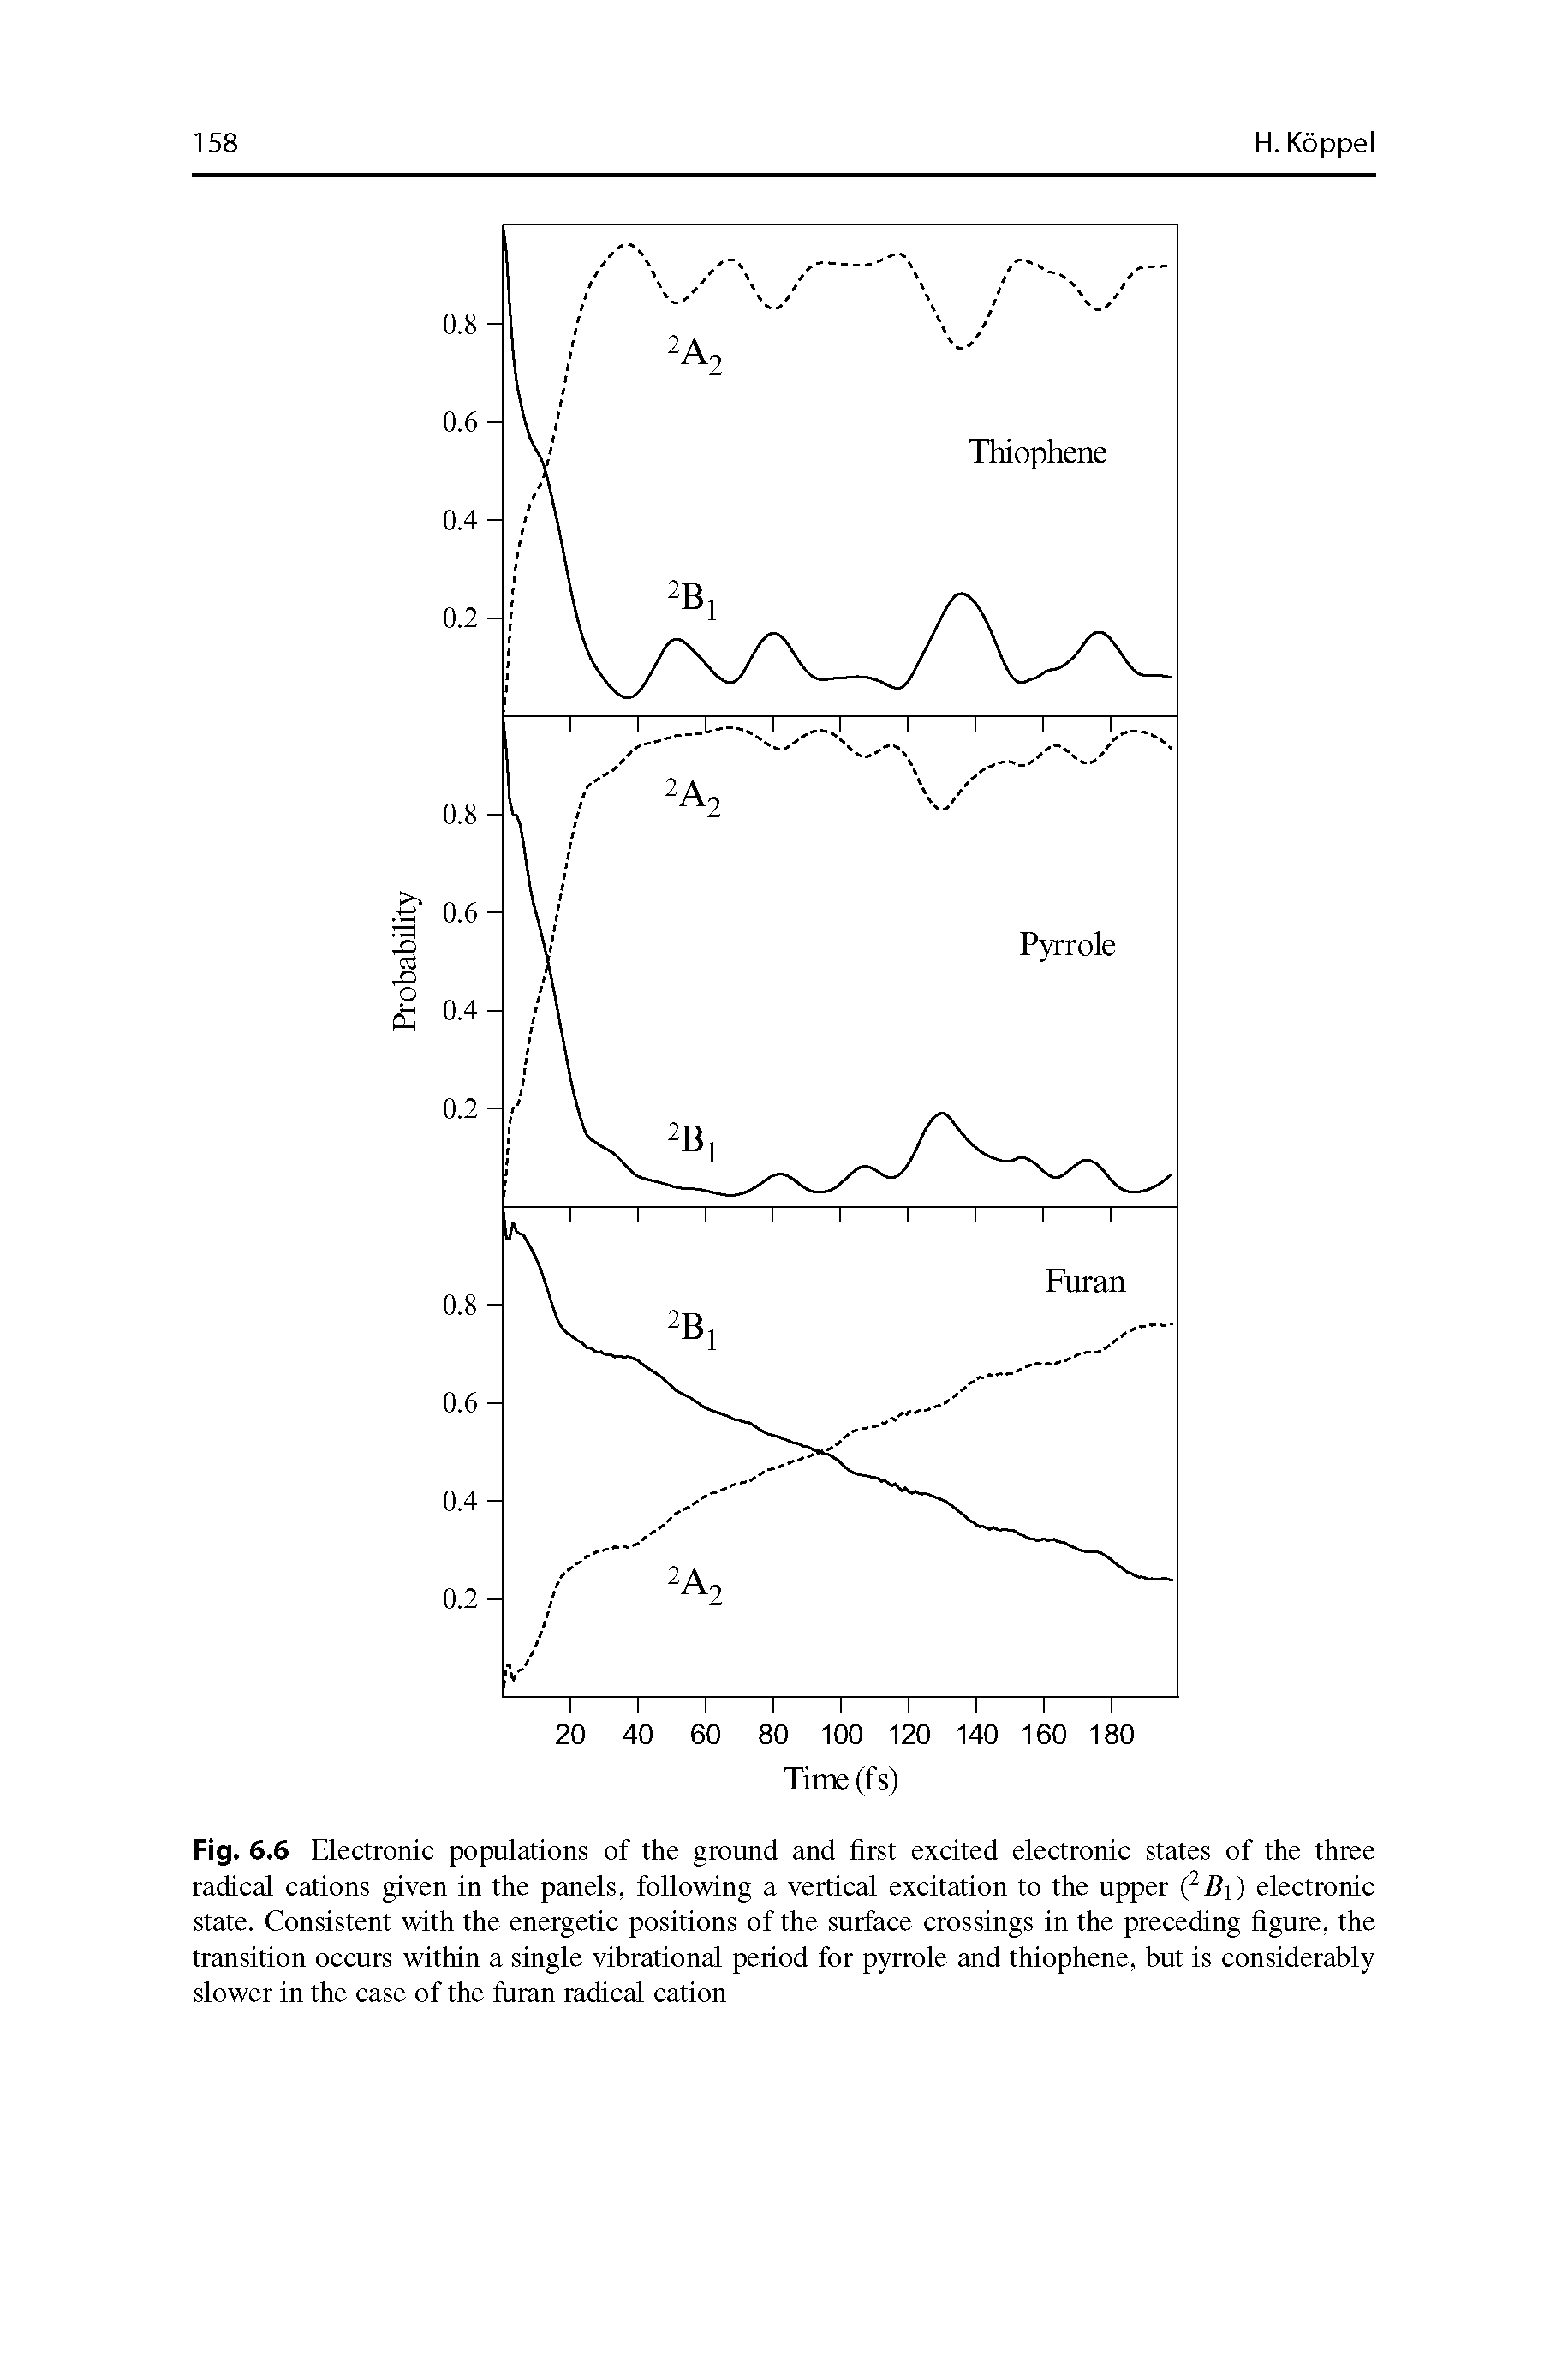 Fig. 6.6 Electronic populations of the ground and first excited electronic states of the three radical cations given in the panels, following a vertical excitation to the upper Bi) electronic state. Consistent with the energetic positions of the surface crossings in the preceding figure, the transition occurs within a single vibrational period for pyrrole and thiophene, but is considerably slower in the case of the furan radical cation...